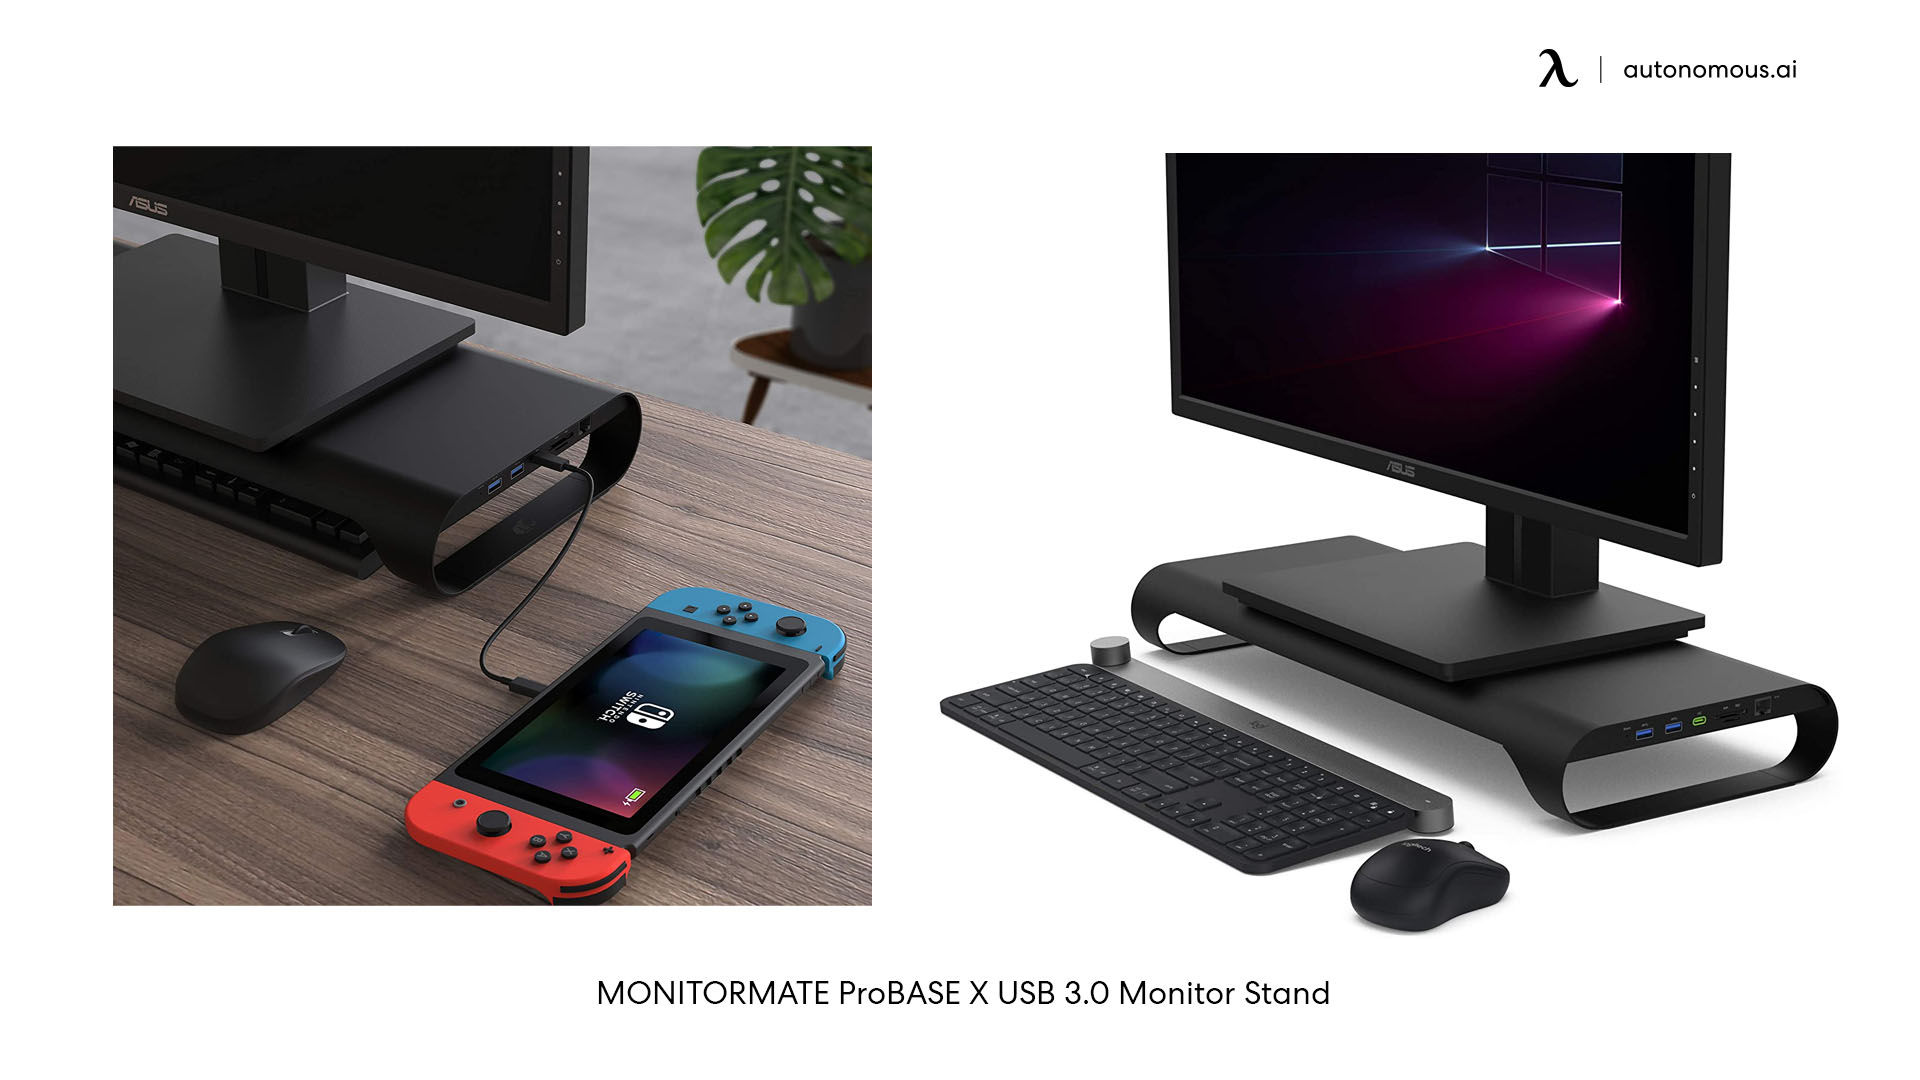 MONITORMATE ProBASE X USB 3.0 Monitor Stand